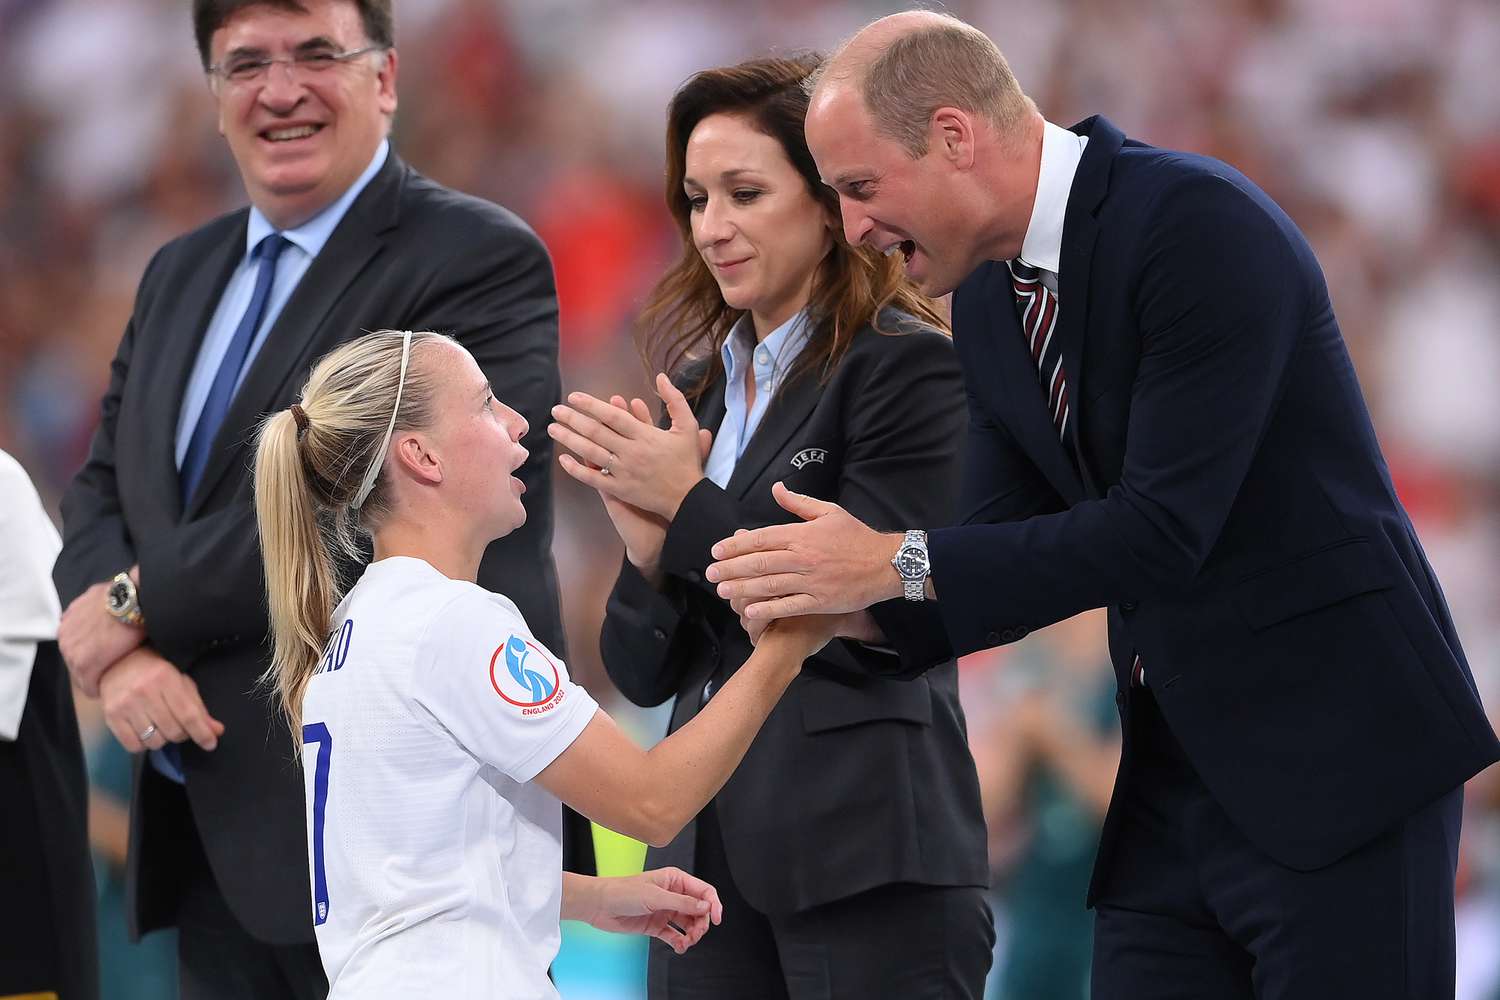 Beth Mead of England shakes hands with Prince William, Duke of Cambridge following the UEFA Women's Euro 2022 final match between England and Germany at Wembley Stadium on July 31, 2022 in London, England.